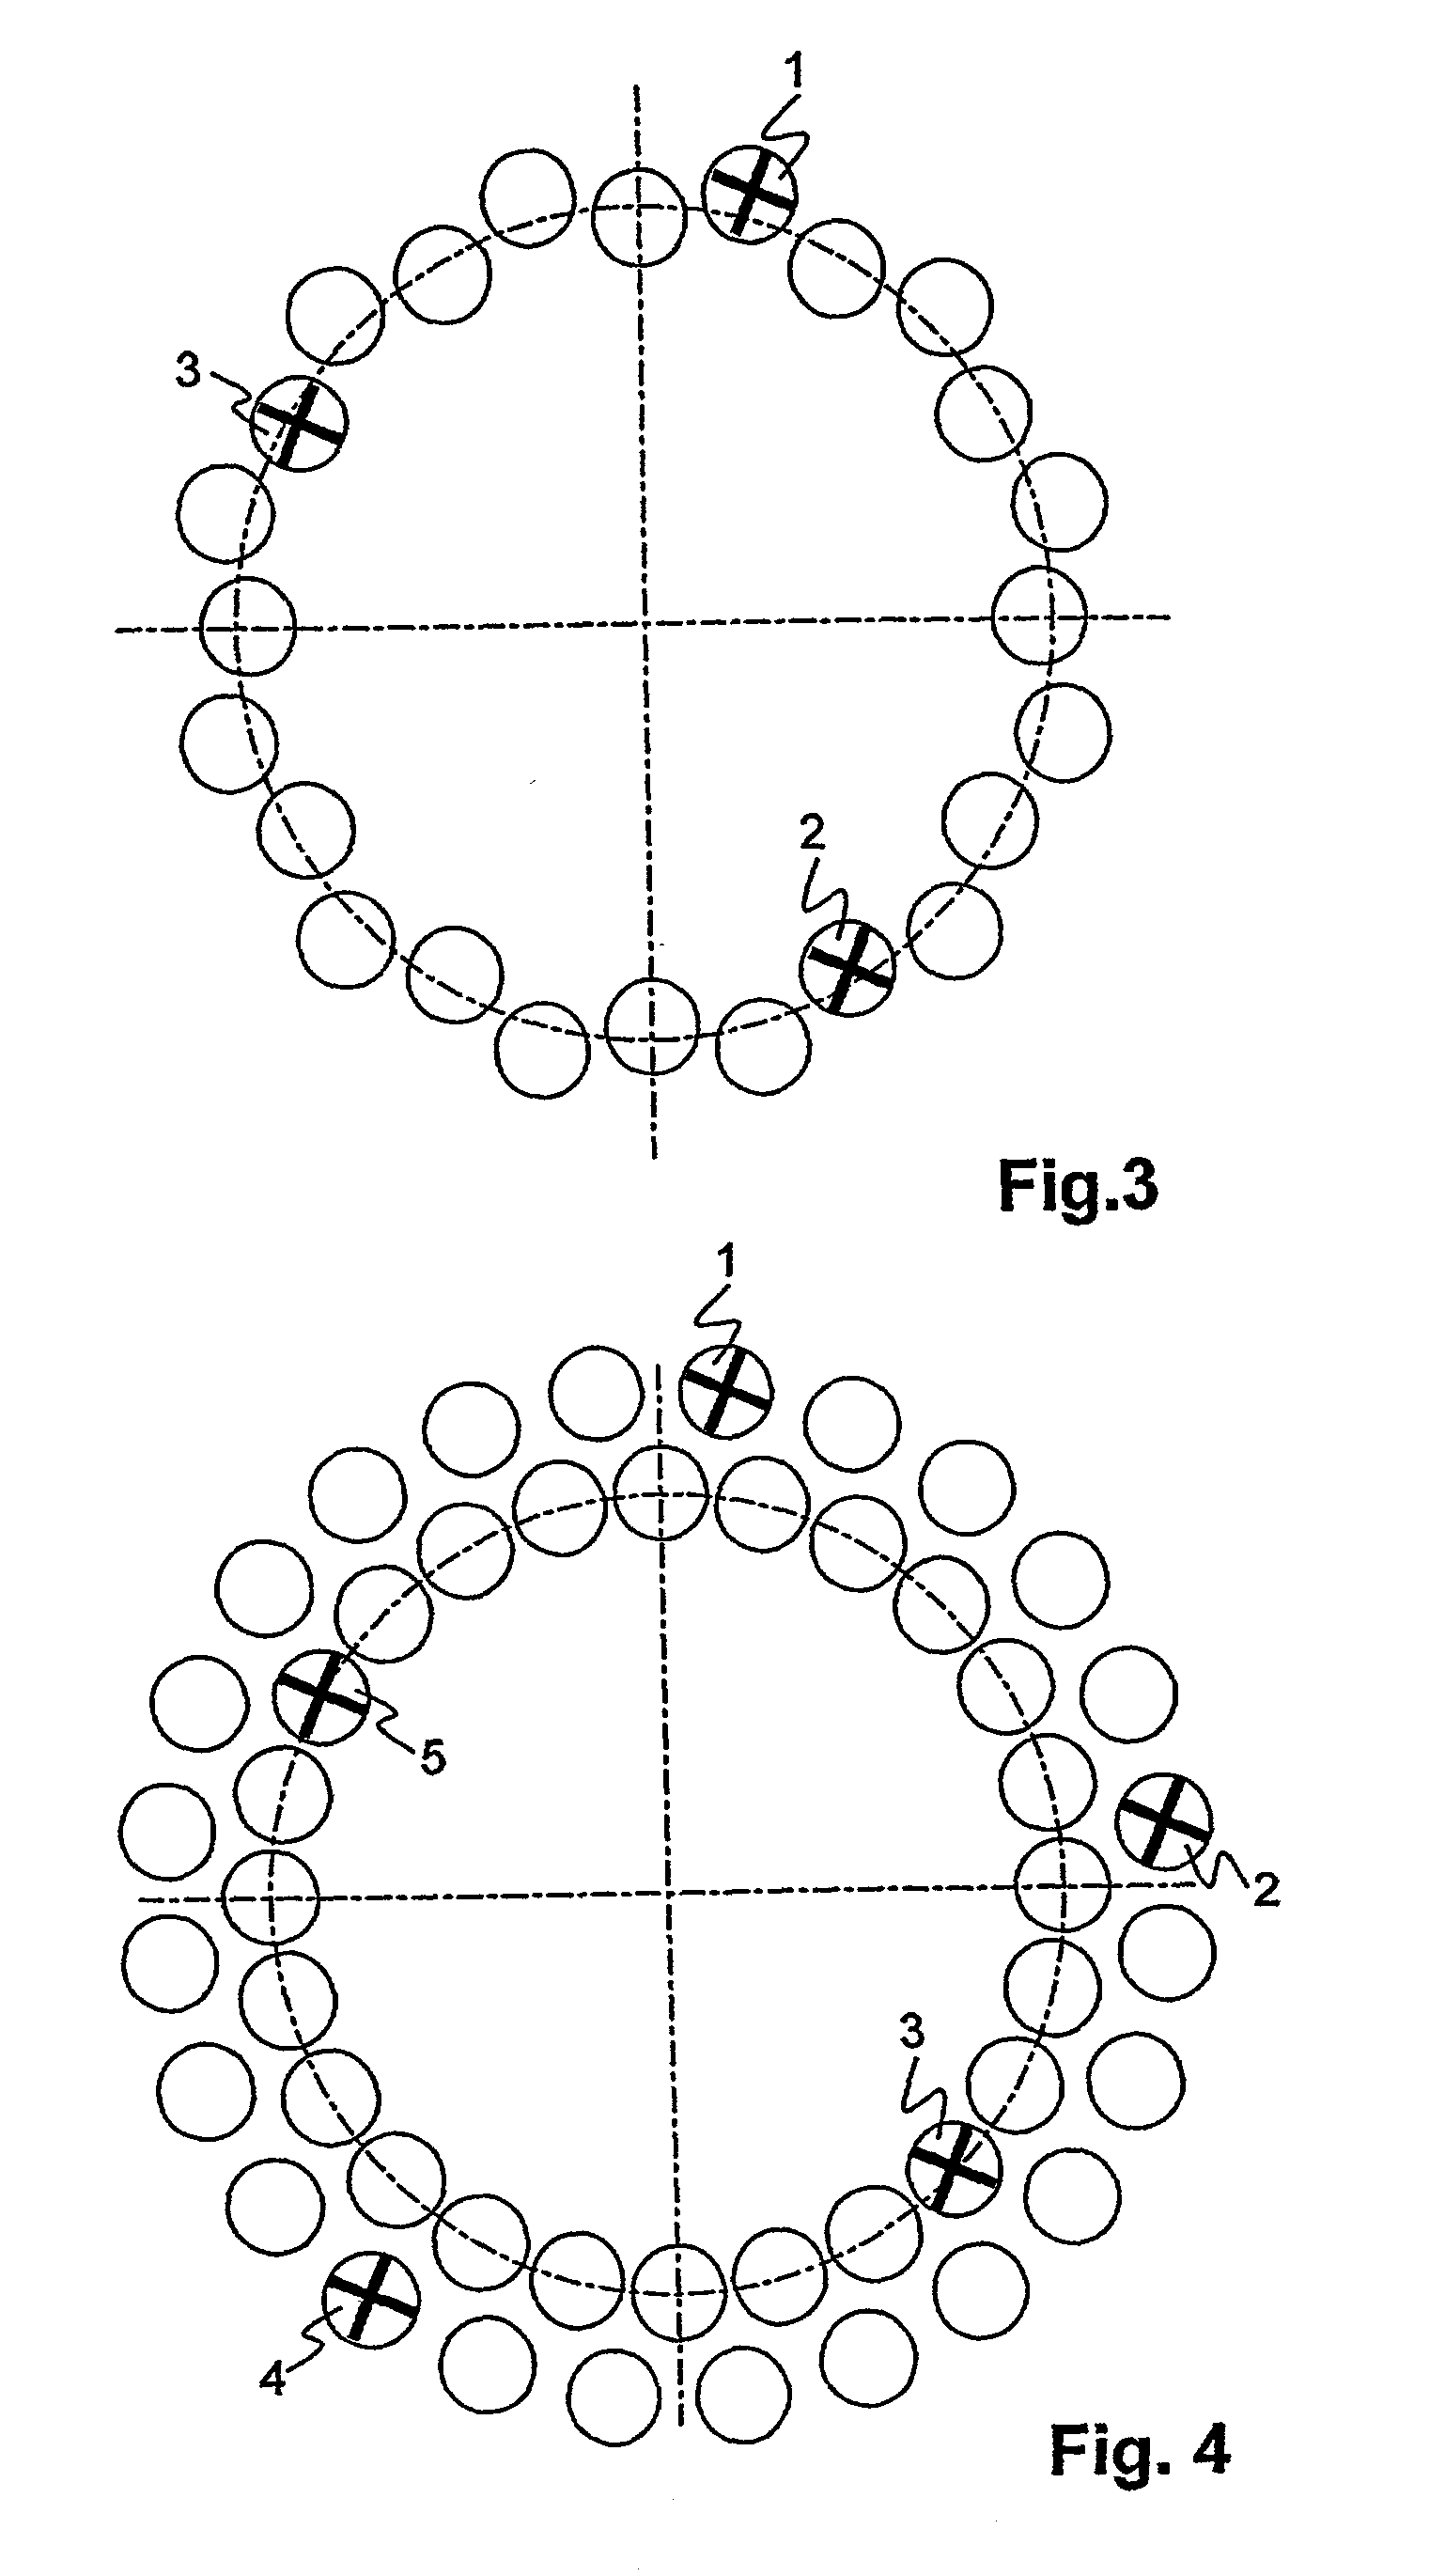 Vibration reduction in a combustion chamber